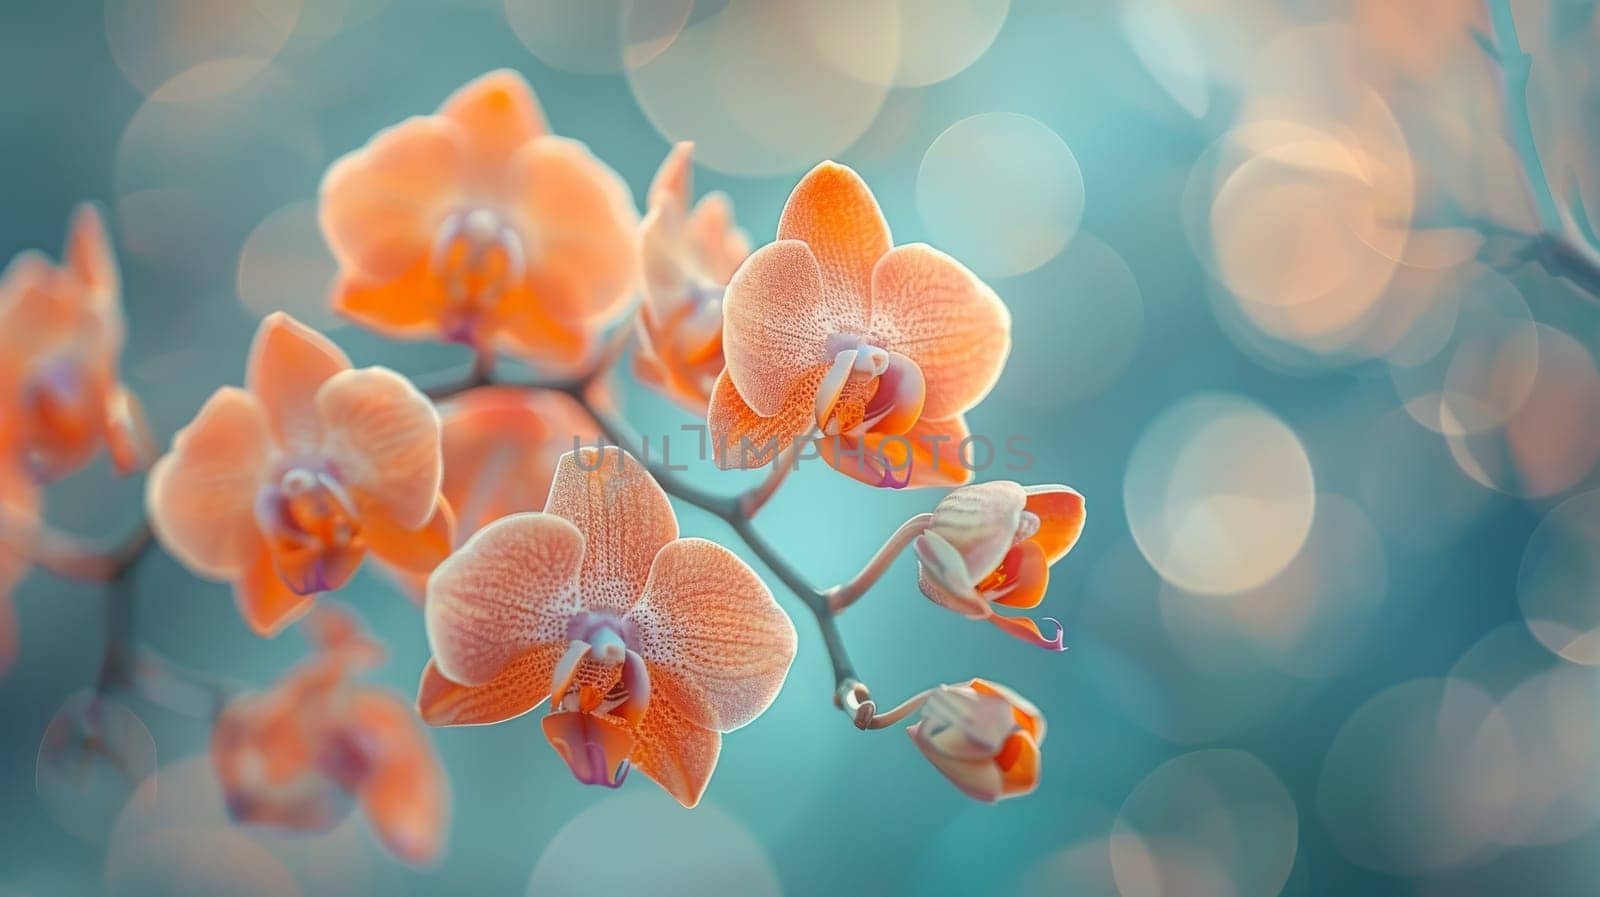 A close up of a branch with orange flowers on it. The flowers are in full bloom and the branch is surrounded by a blue background. Concept of serenity and beauty